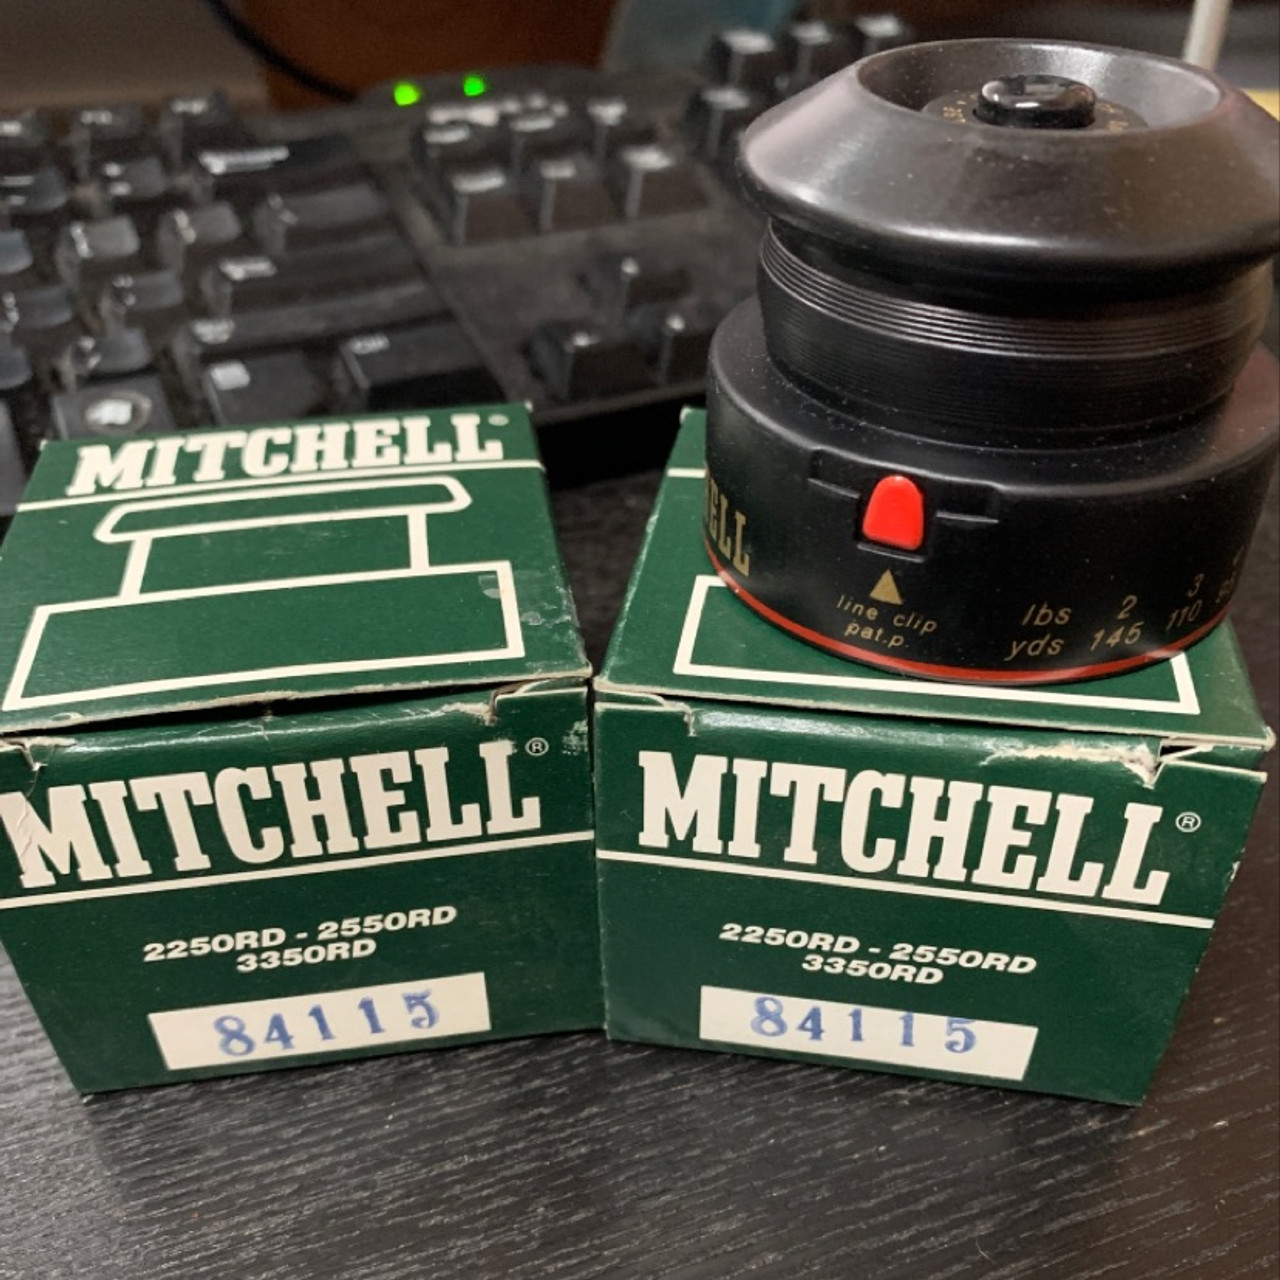 MITCHELL SPARE SPOOLS FOR 2250RD, 2550RD, 3350RD